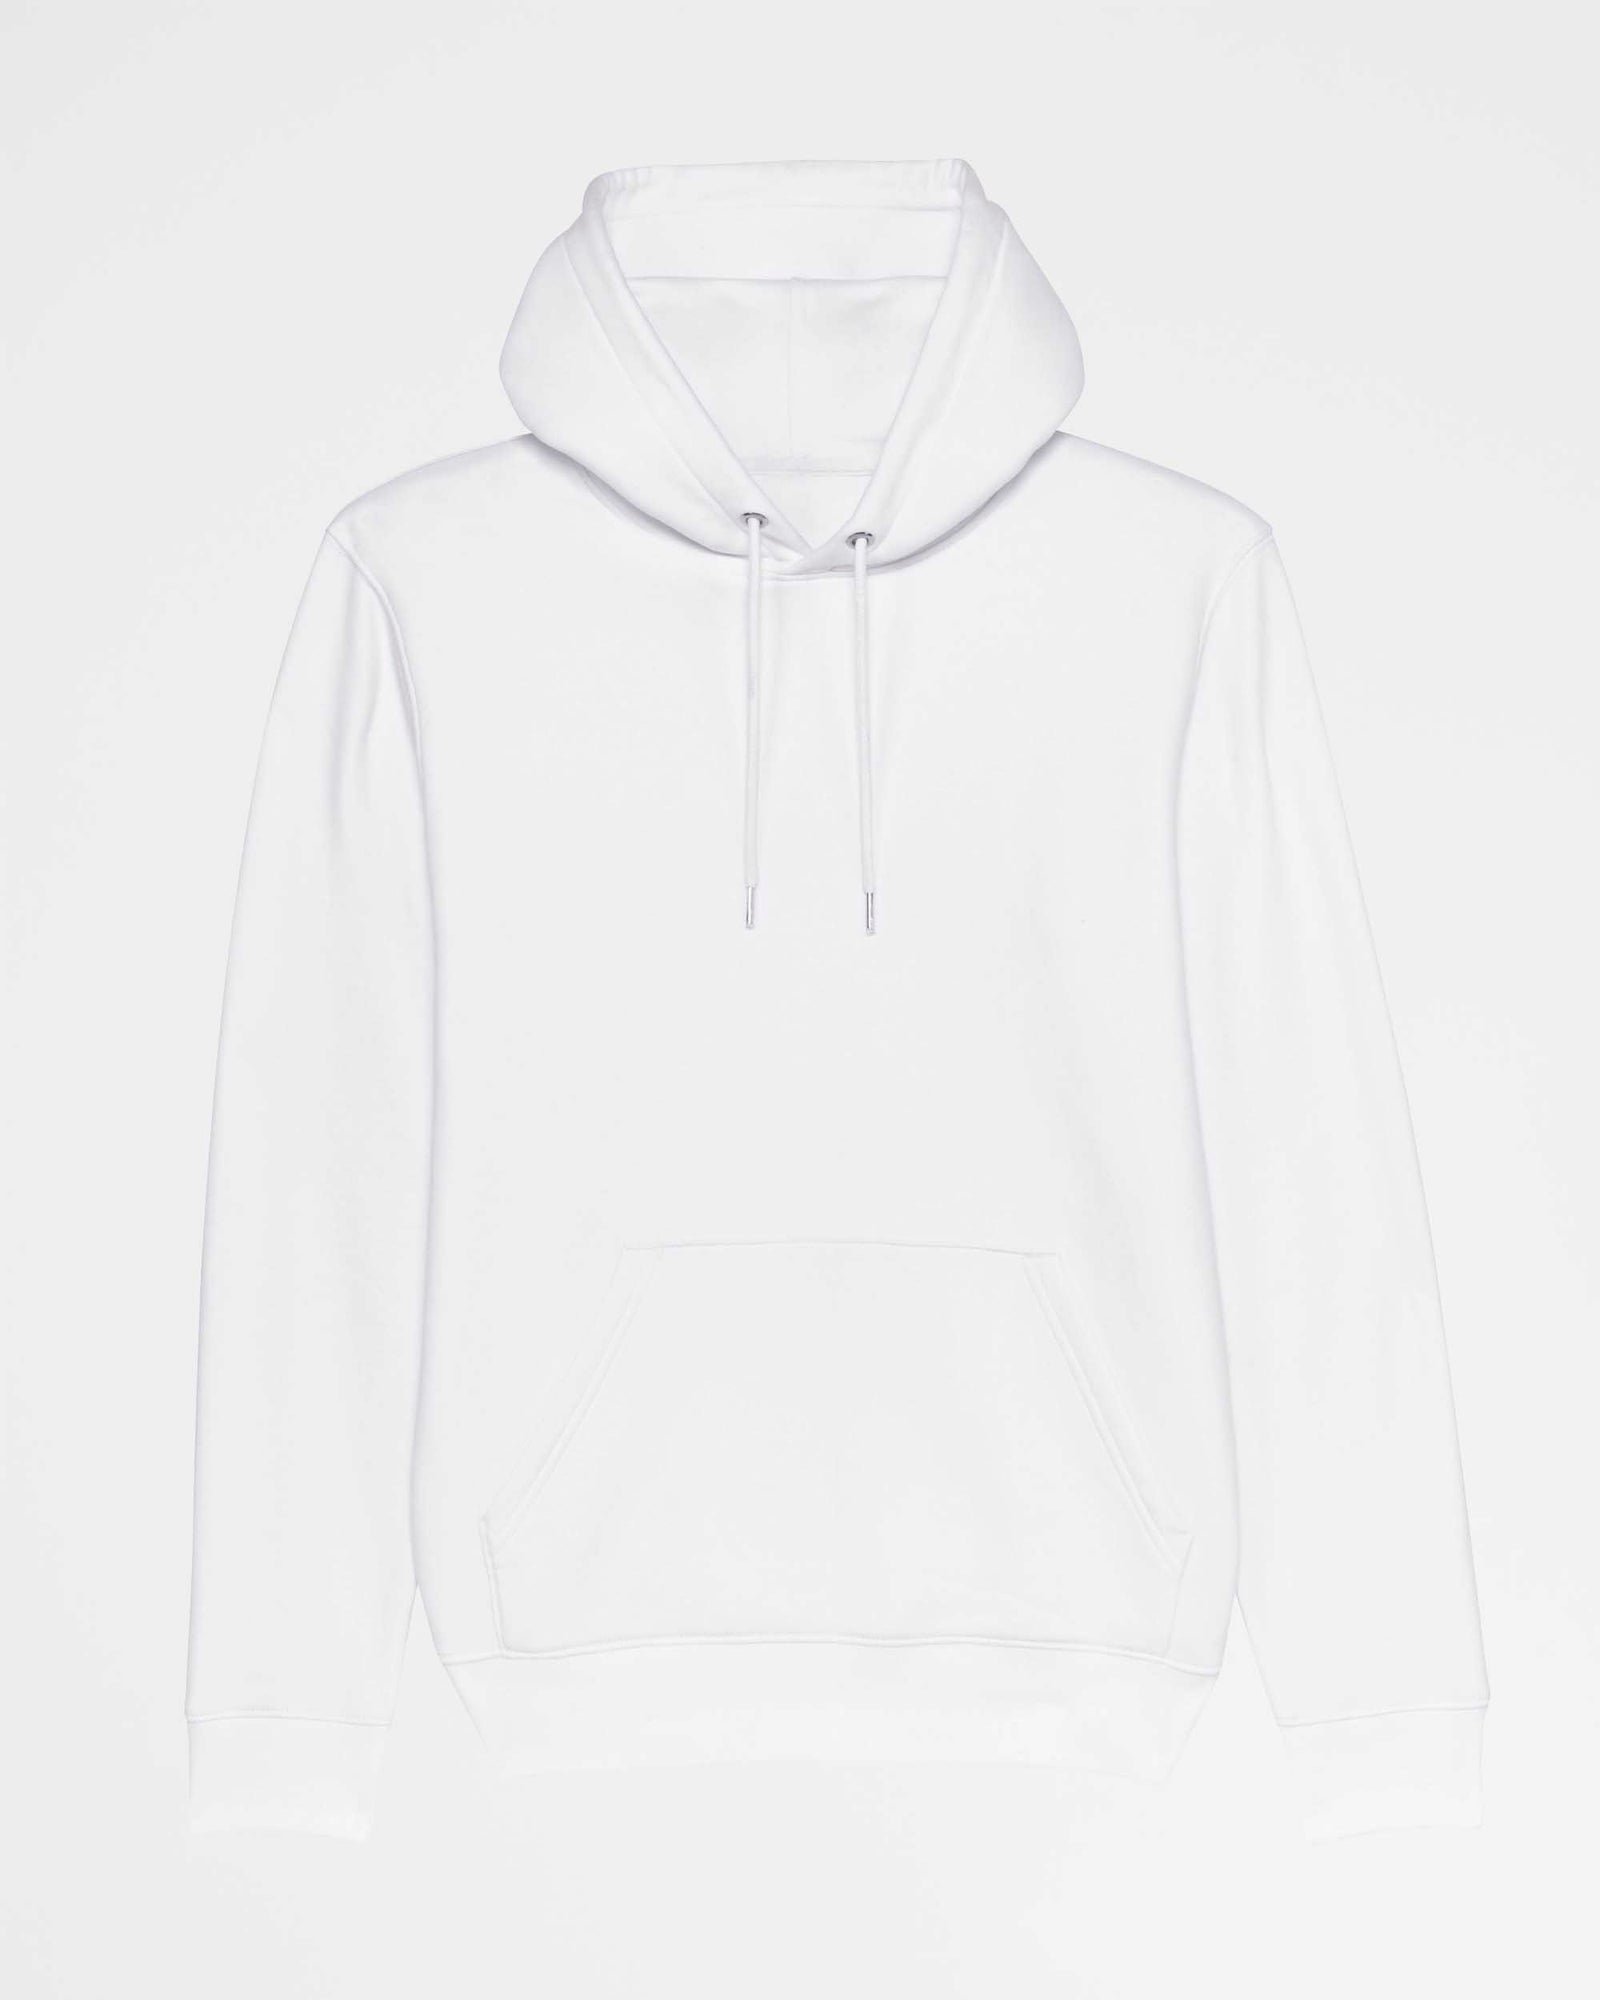 Pack It Up | 3-Style Hoodie